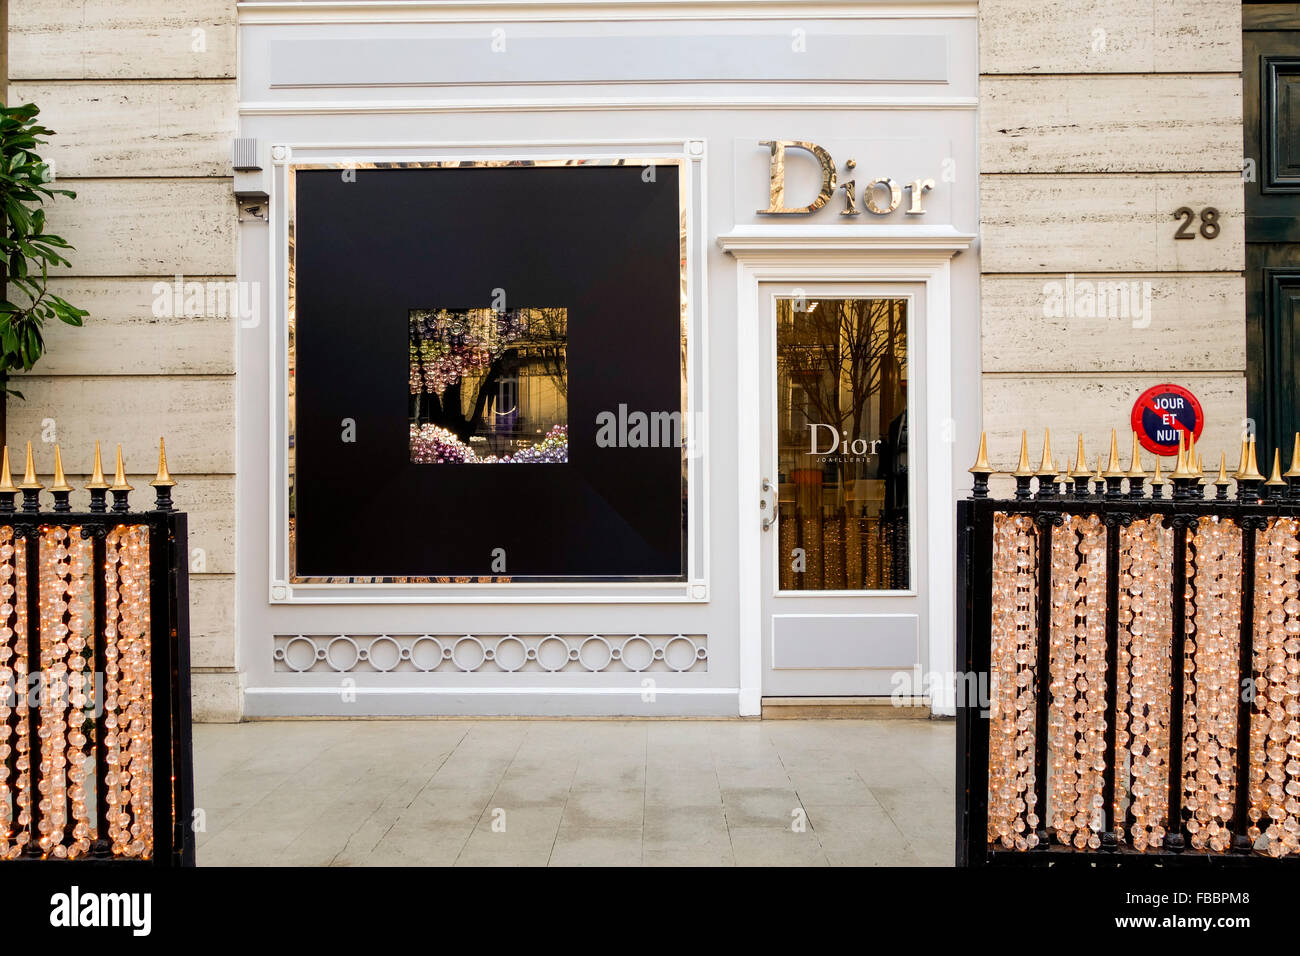 Dior window display High Resolution Stock Photography and Images - Alamy